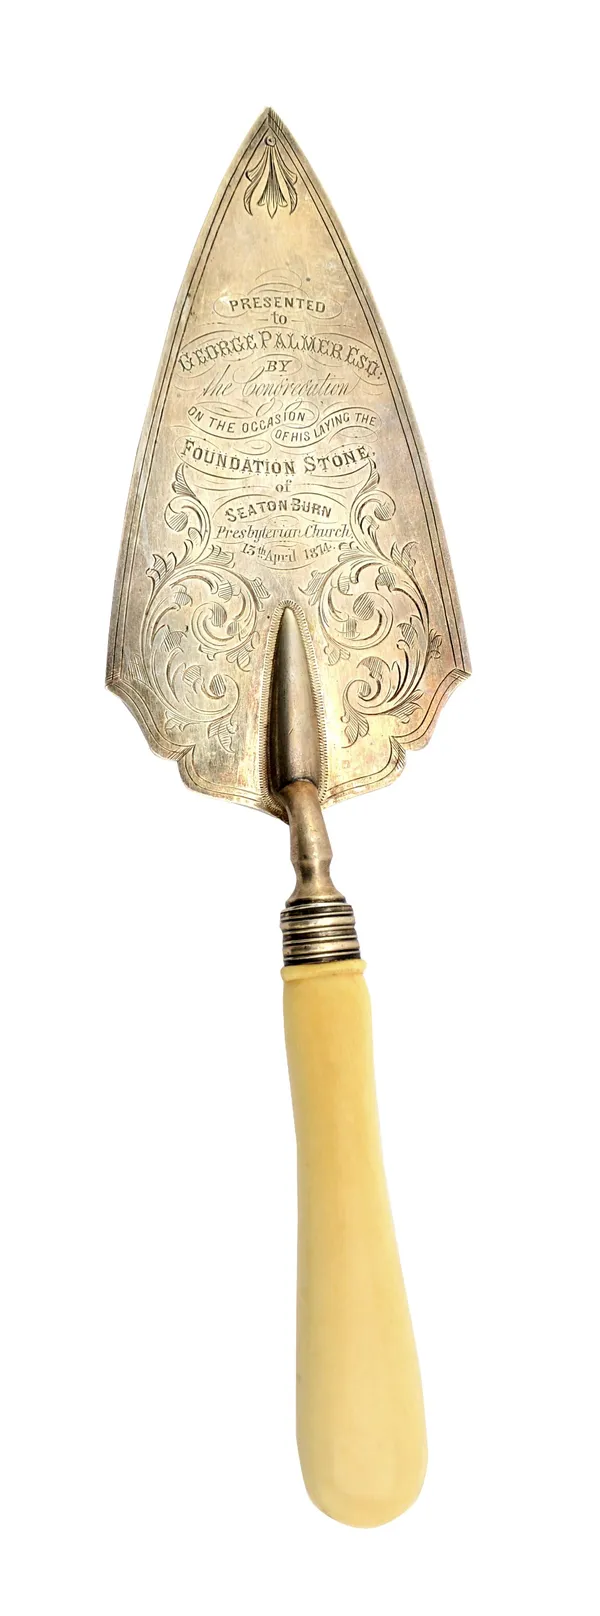 A Victorian silver presentation masonary trowel, detailed Presented to George Palmer Esq, by the congregation on the occasional of his laying the foun